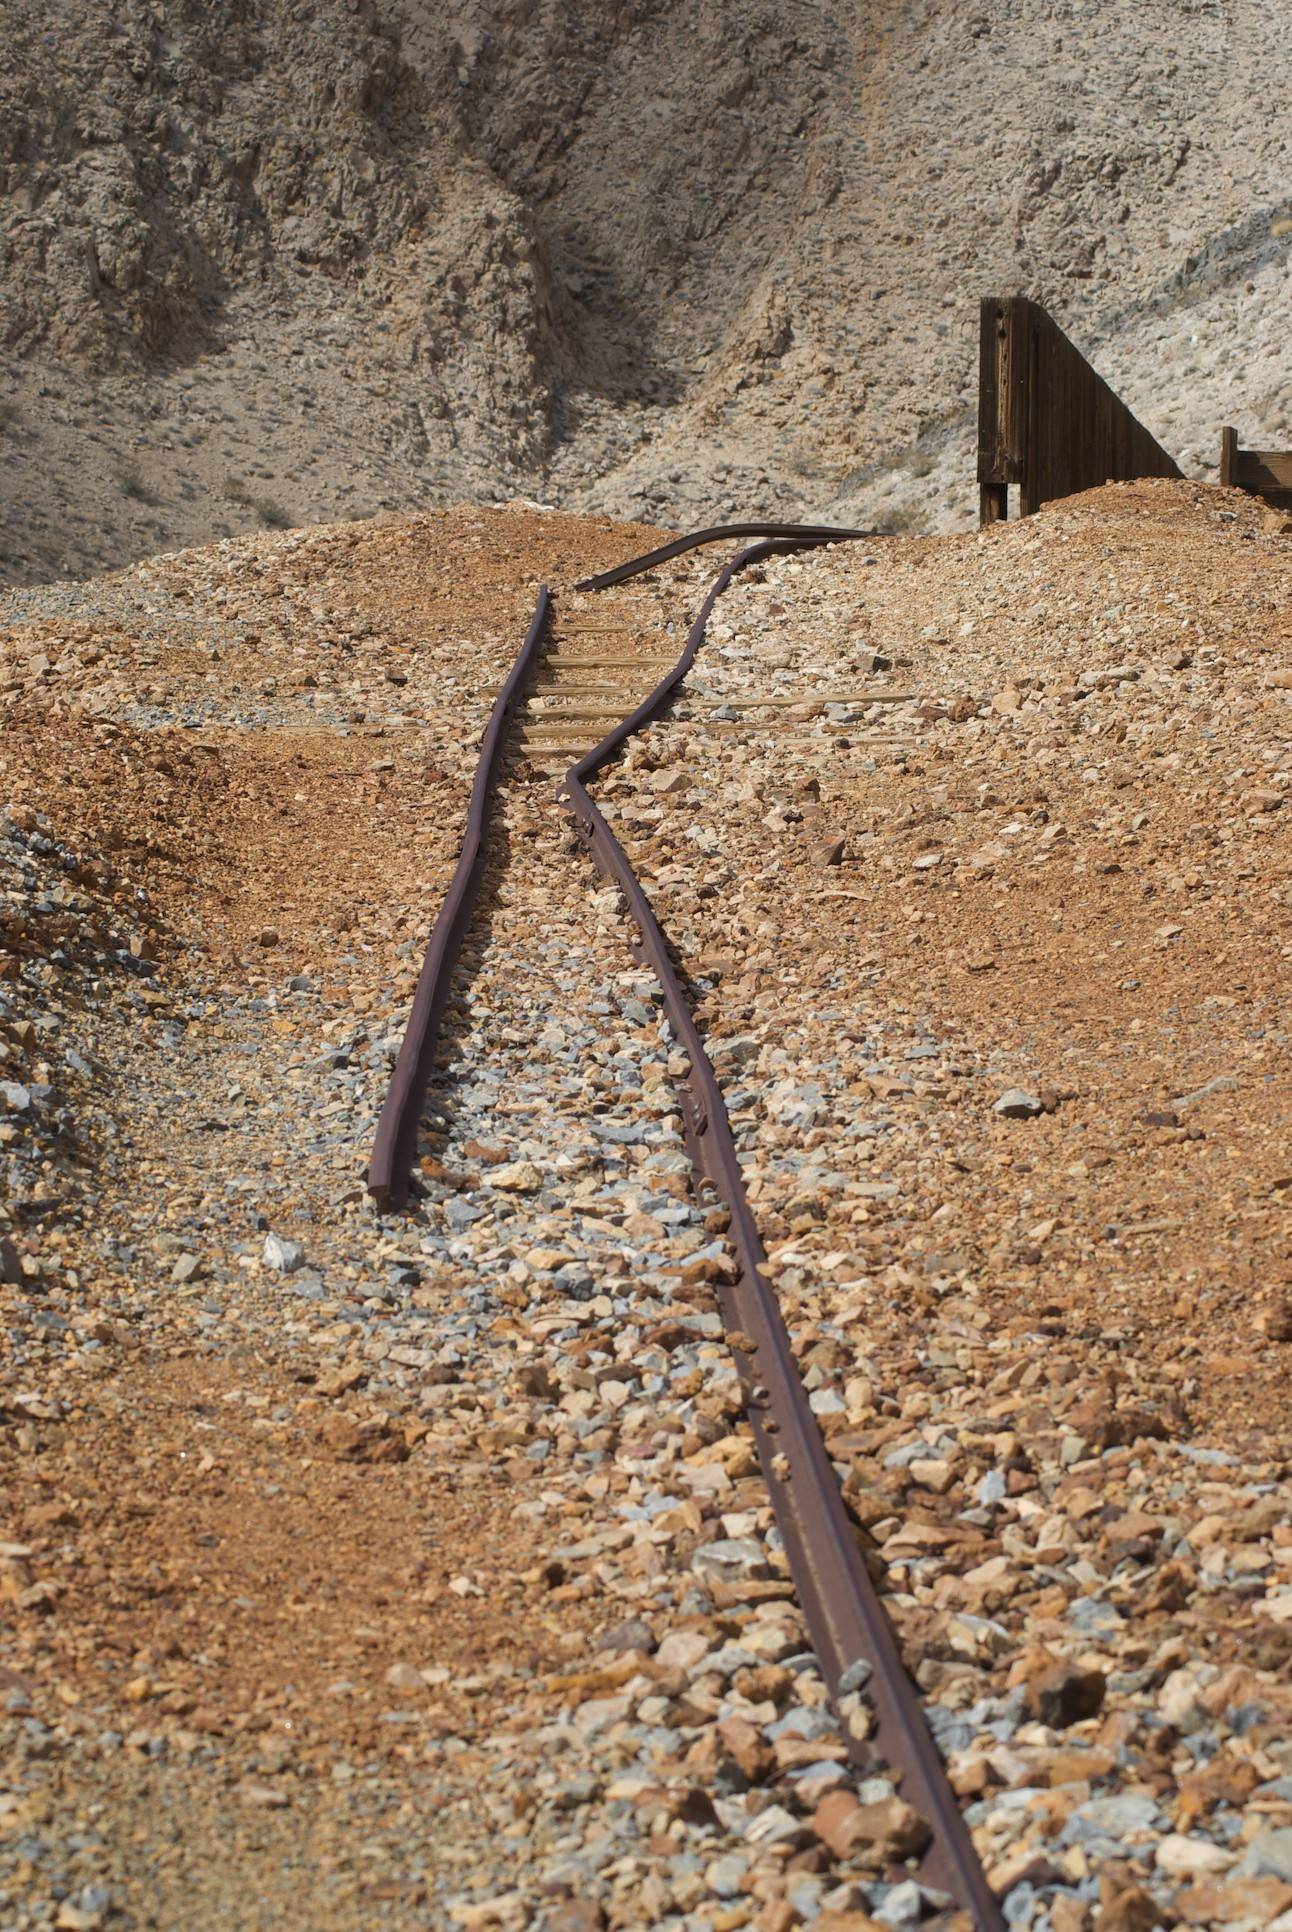 Tram rails at the Ubehebe Lead Mine, Death Valley National Park, California